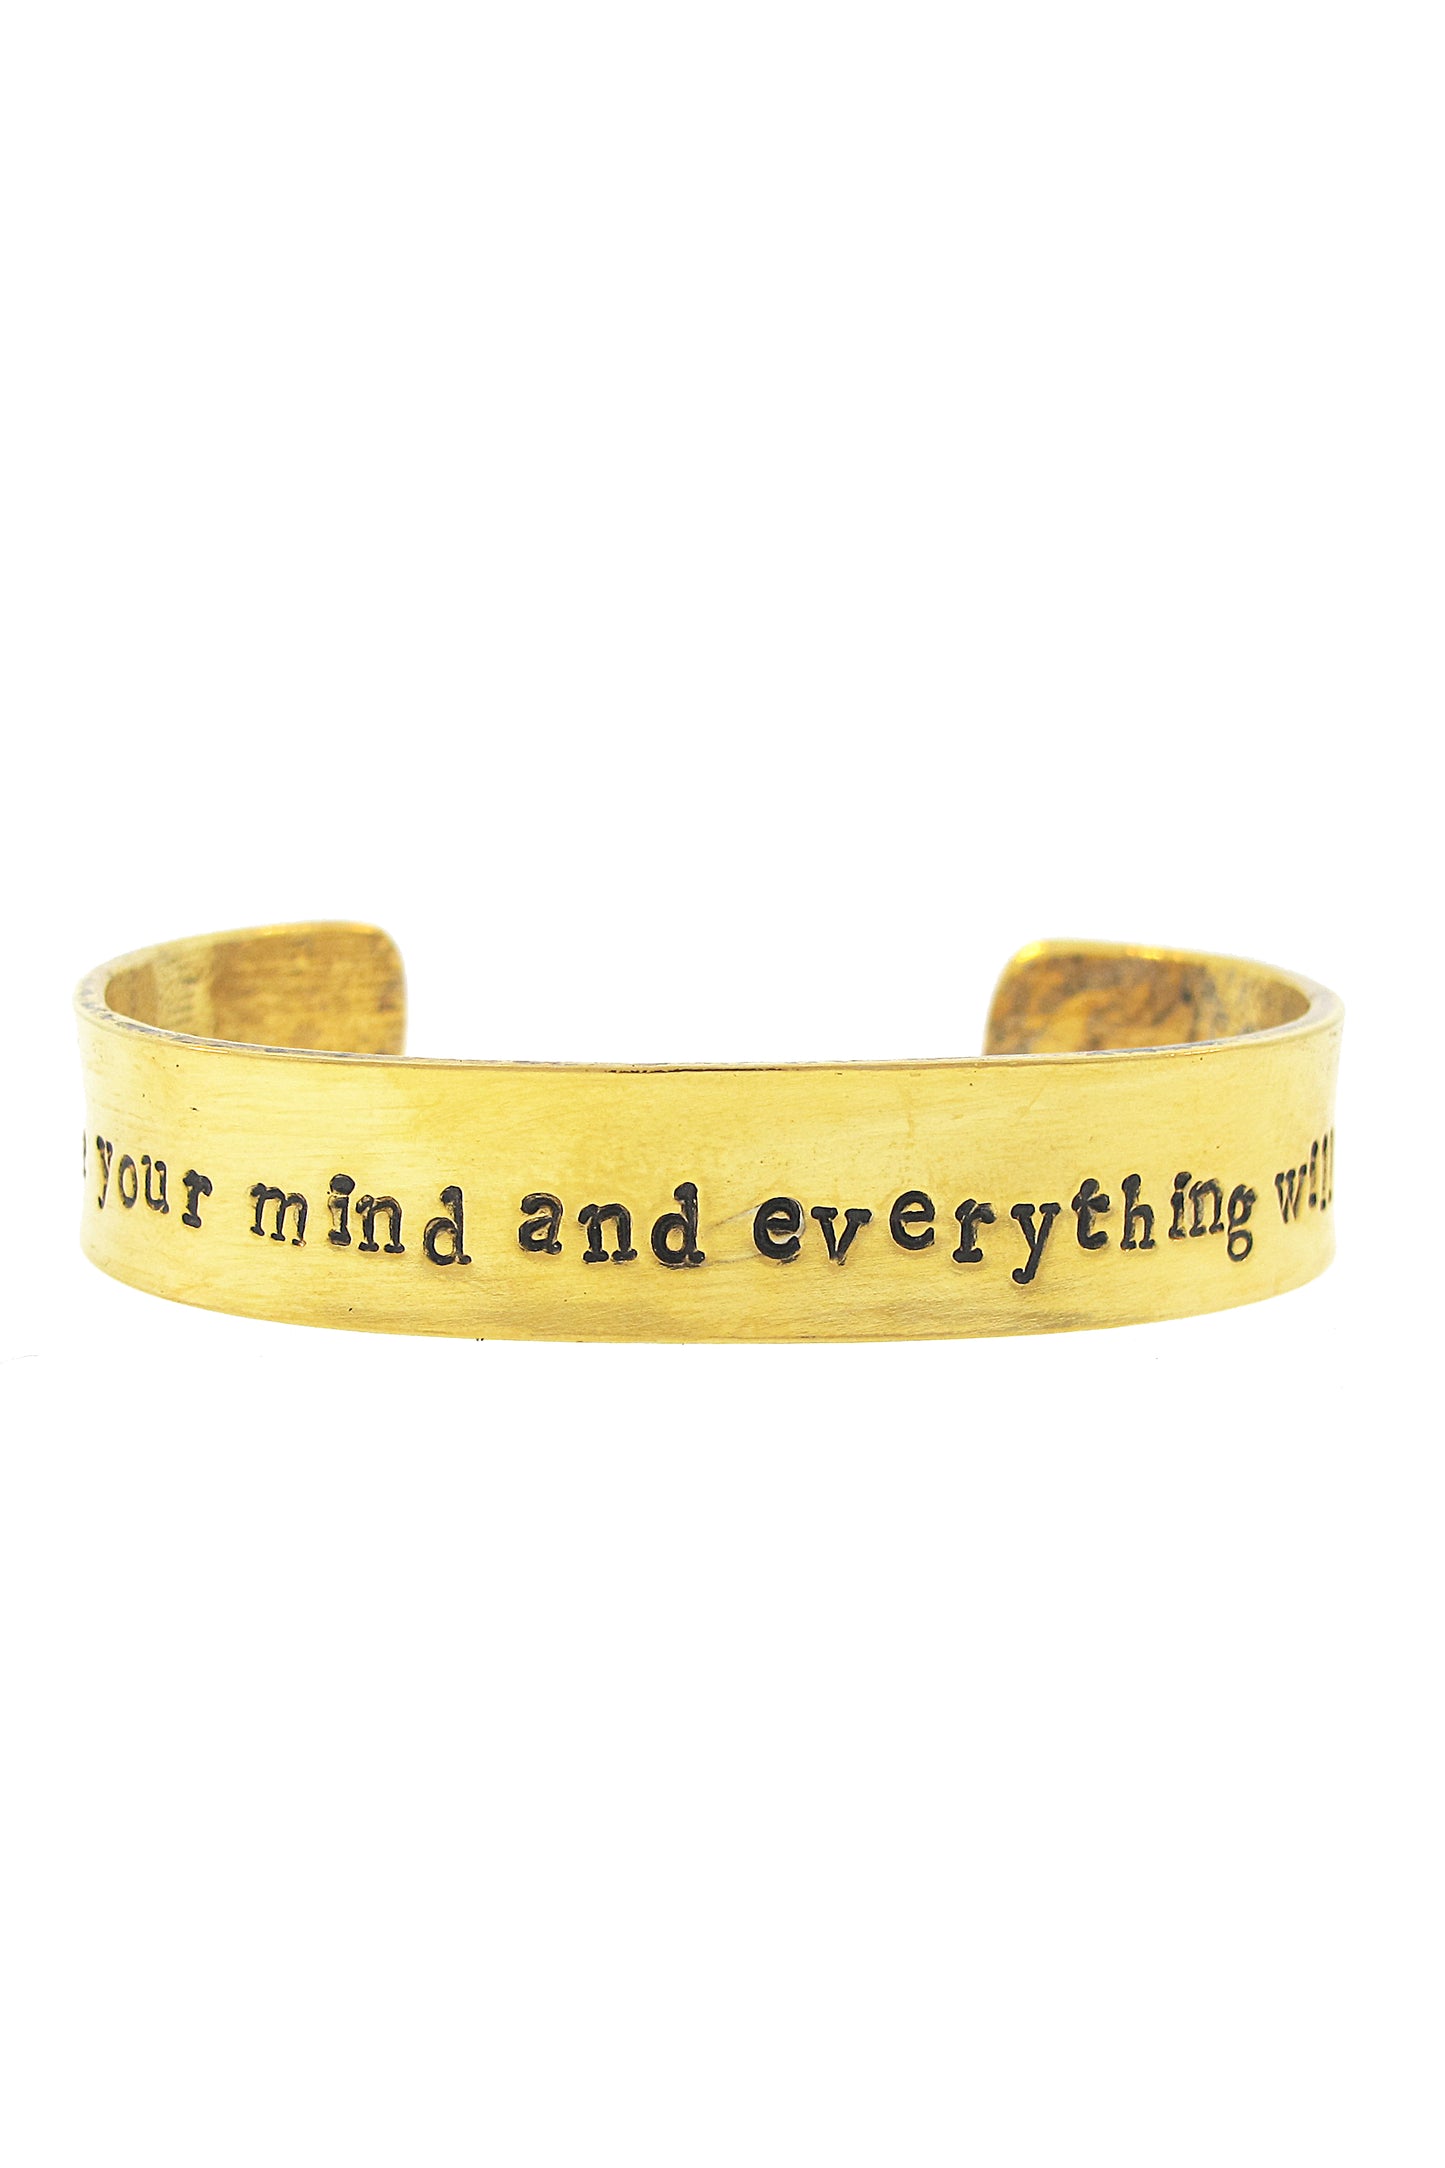 Free Your Mind Hand Stamped Cuff